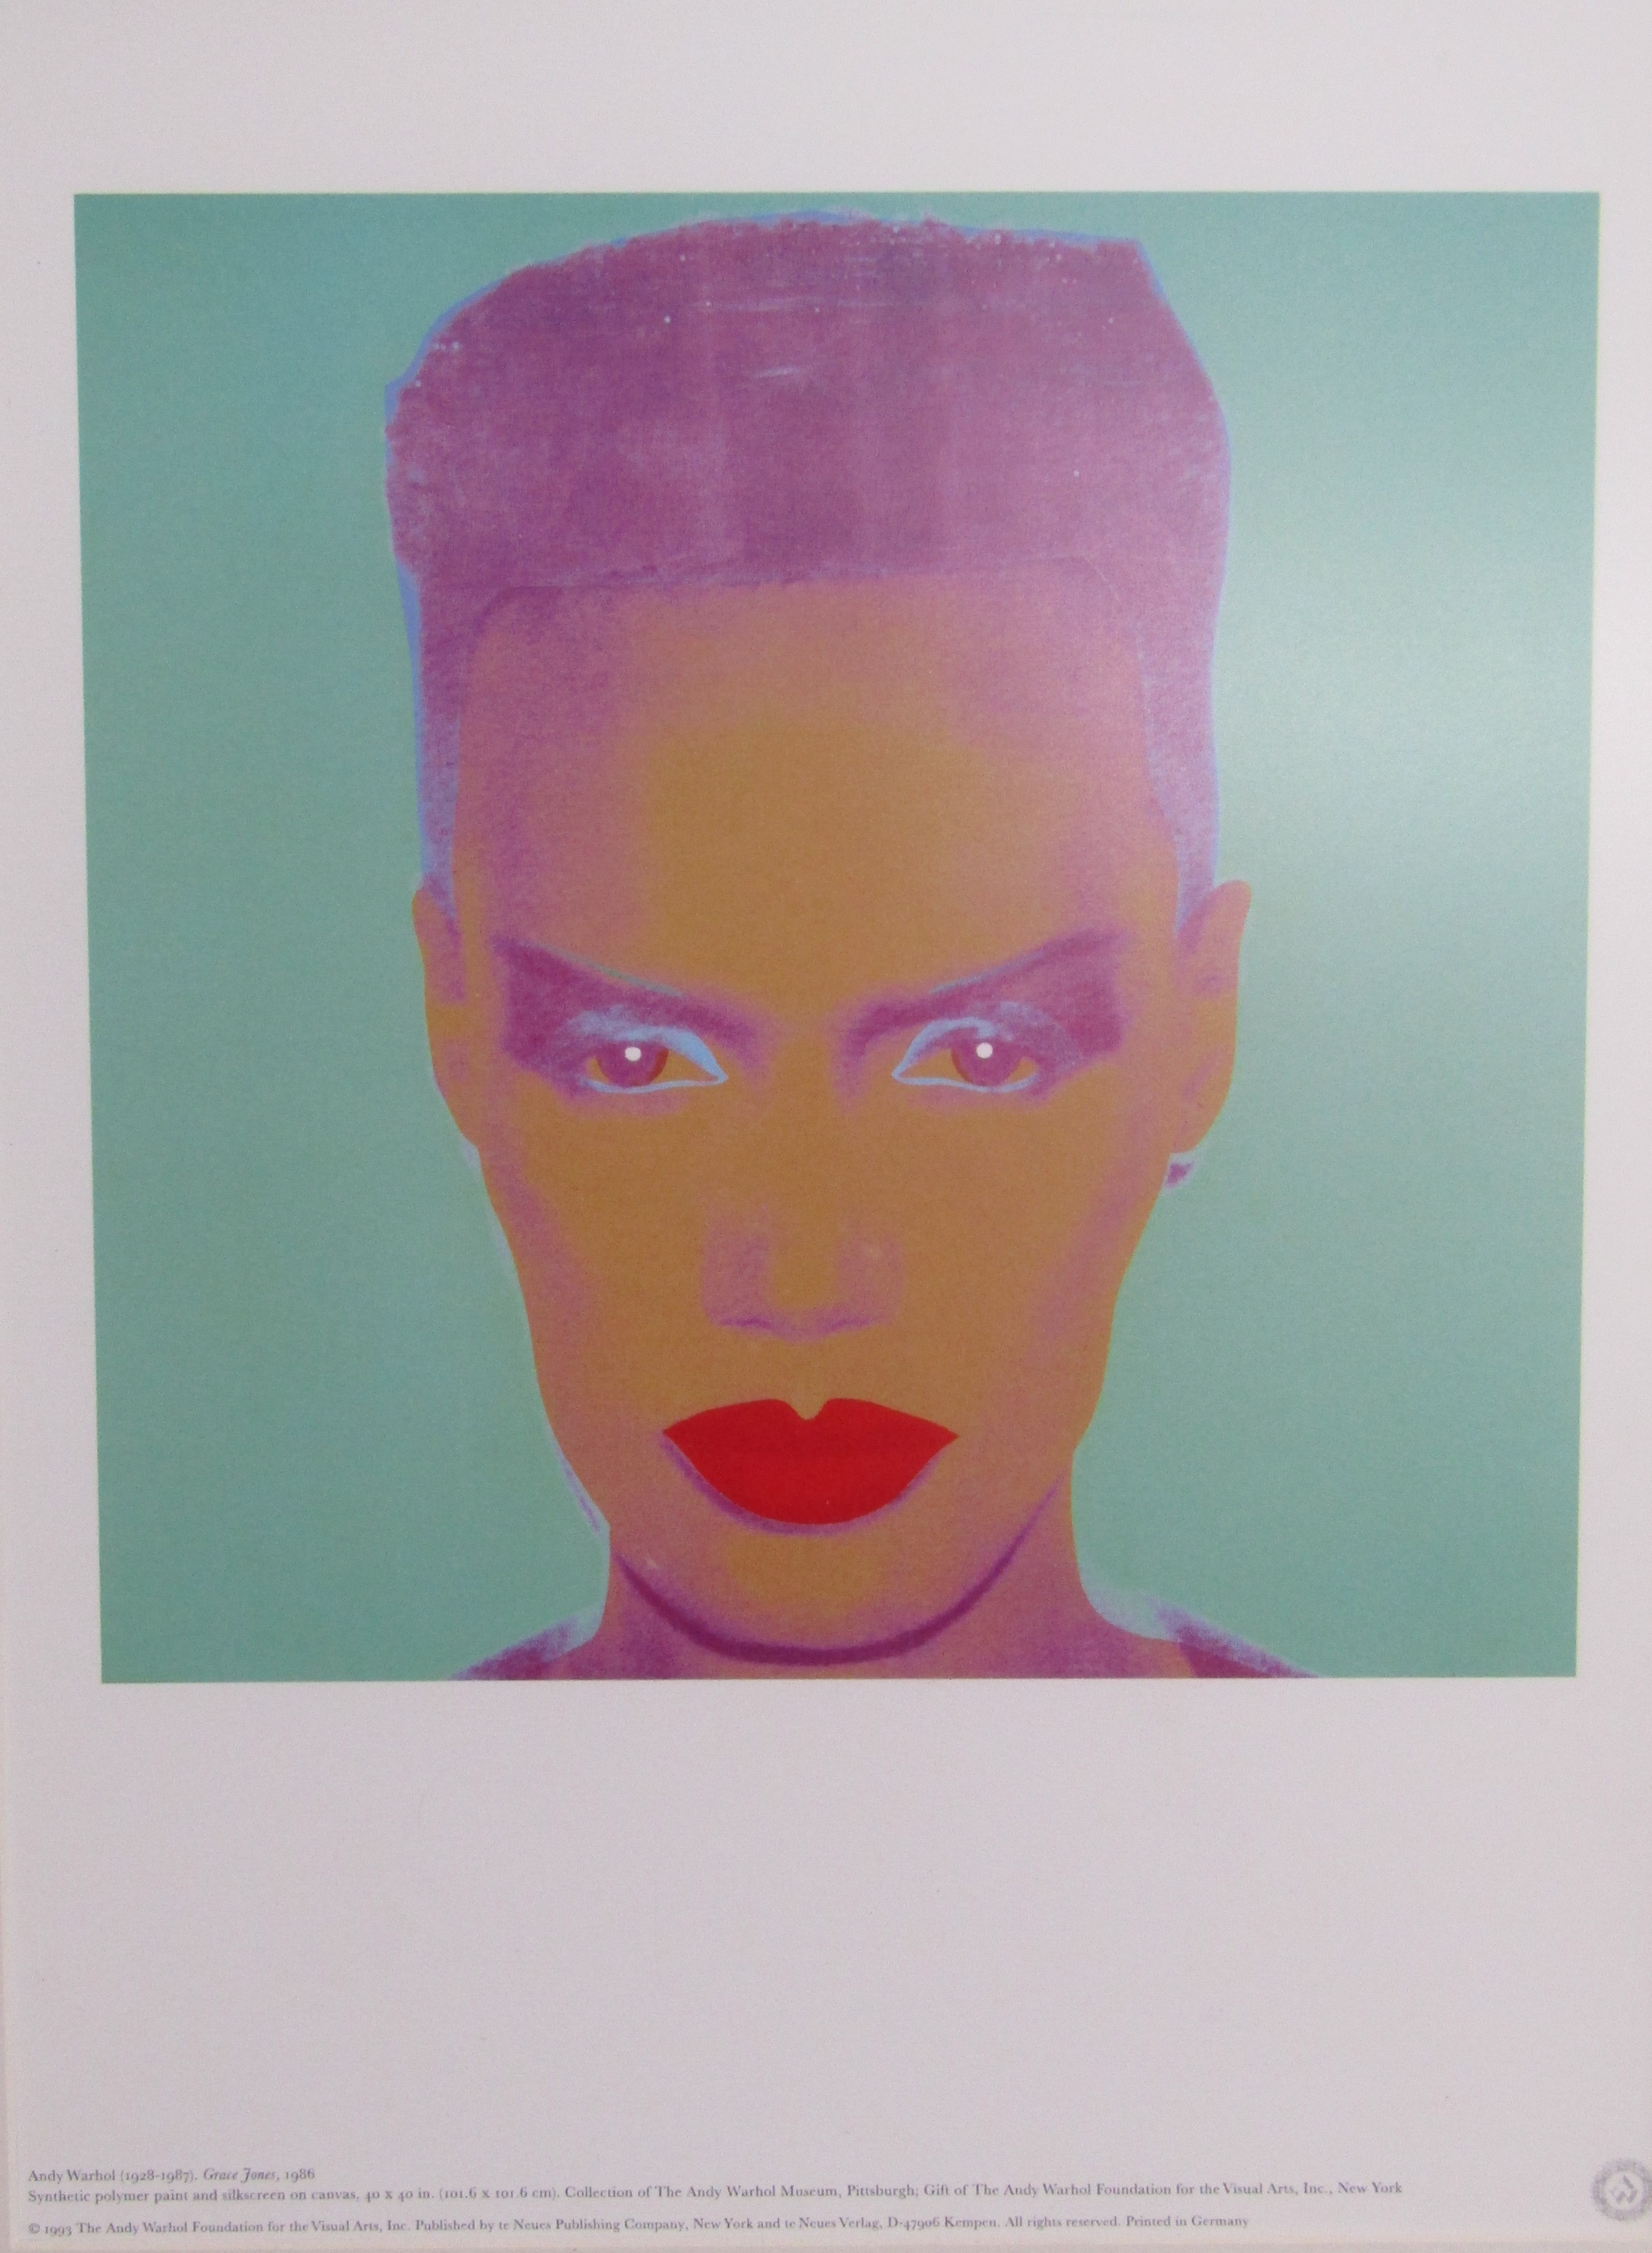 Framed Andy Warhol lithographic print 'Grace Jones' published by Neues New York in association - Image 2 of 6